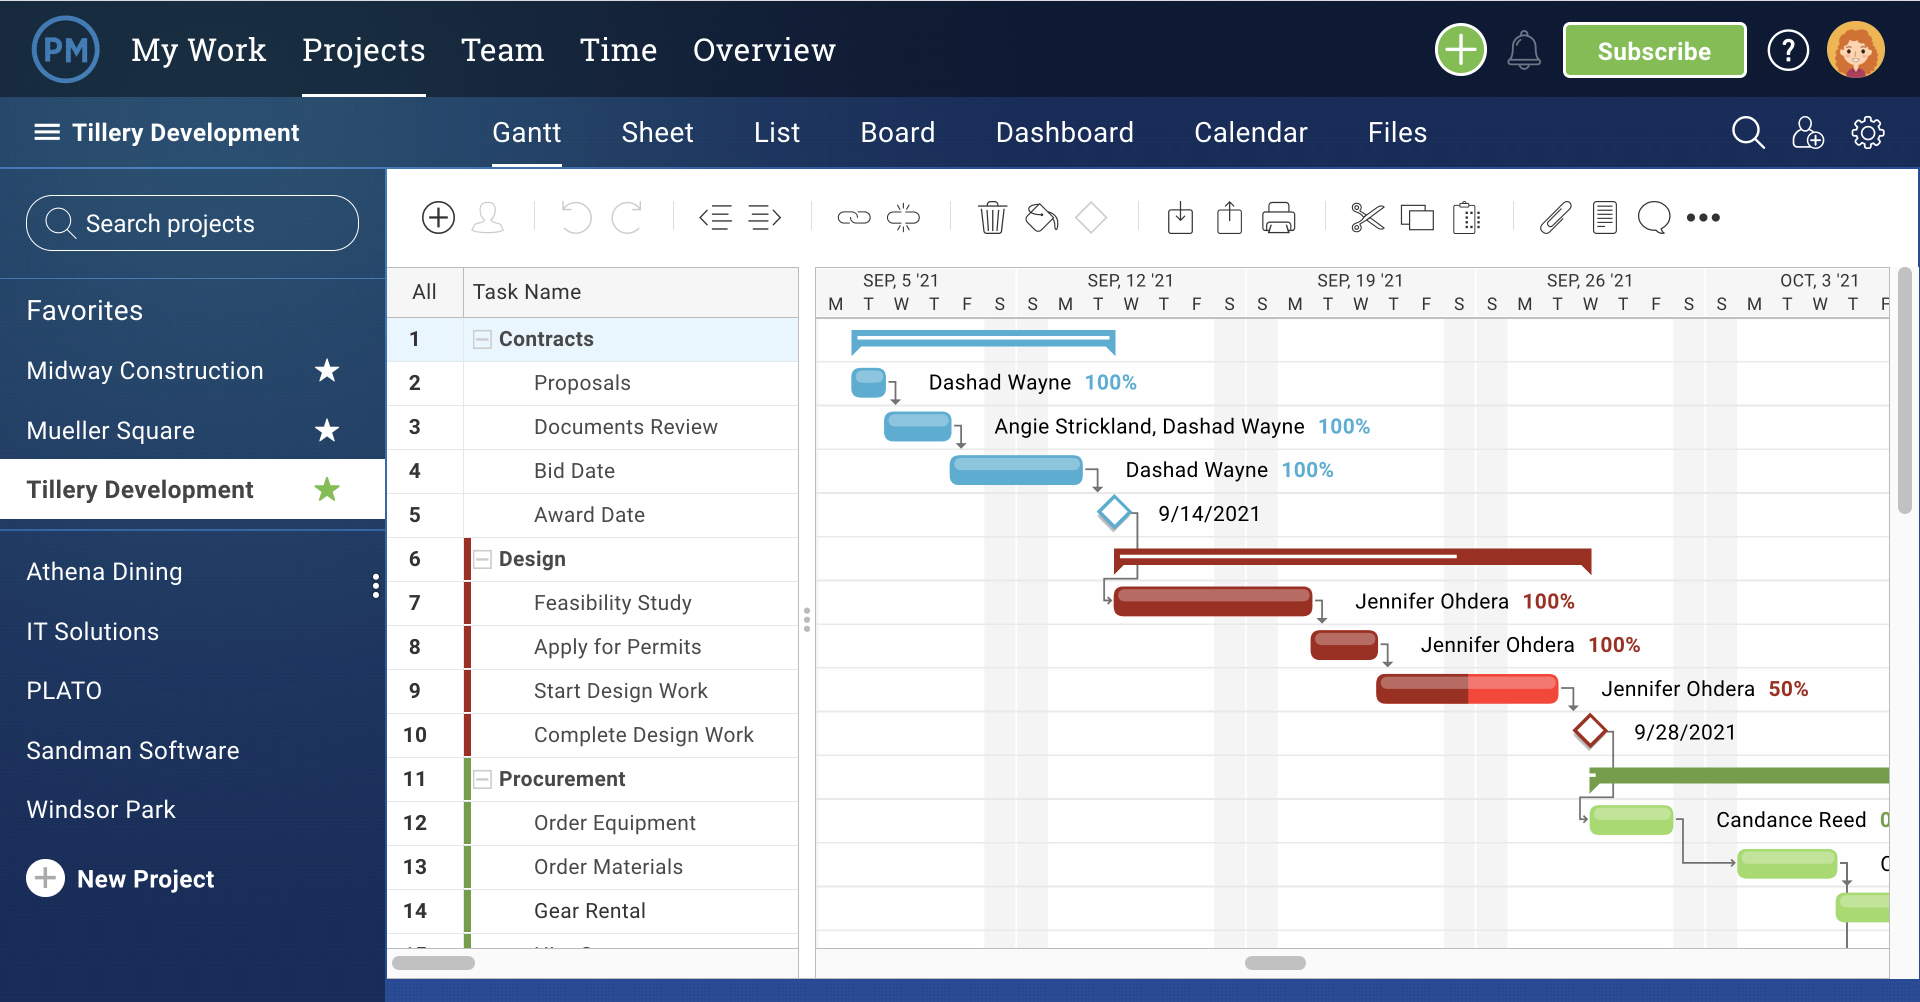 A screenshot of the team management screen in ProjectManager.com